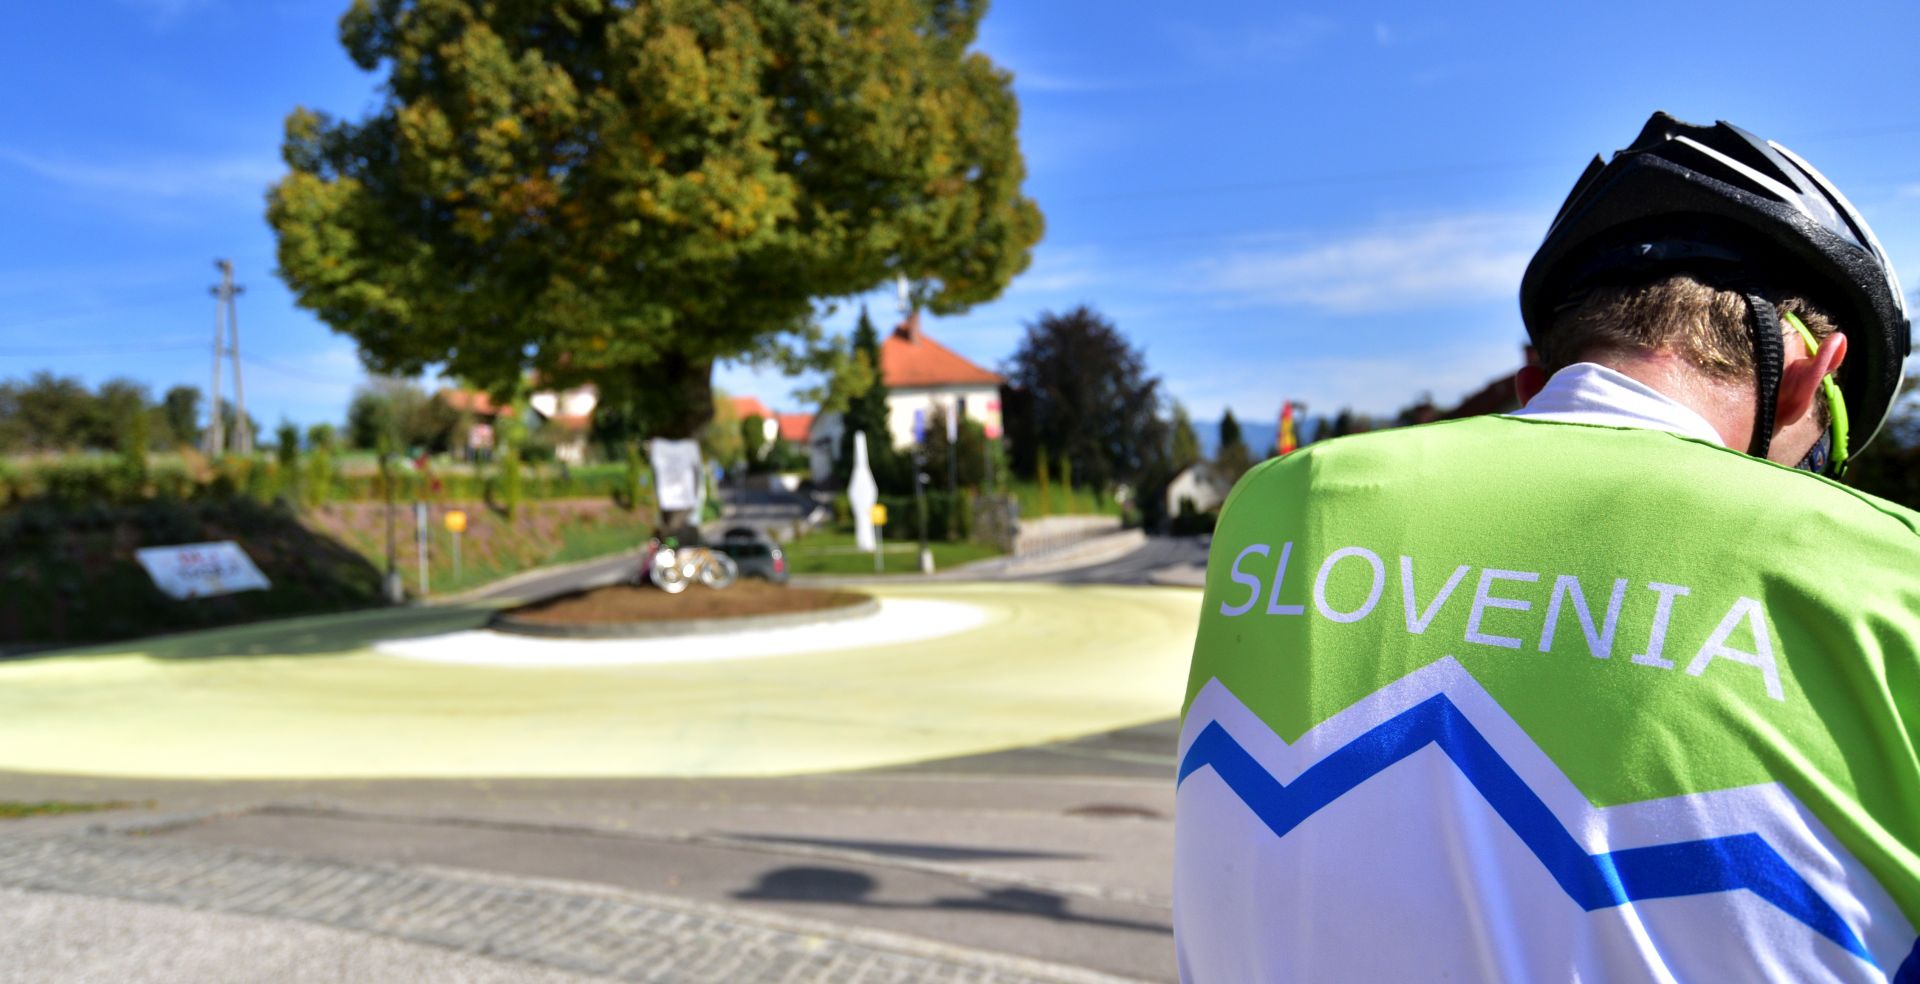 epa08683169 Locals gather at a roundabout painted in yellow and white in the village of Komenda, Slovenia, 20 September 2020, before last stage of 107th Tour de France. The village is the home town of cylcist Tadej Pogacar of the UAE-Team Emirates team who concquered the yellow jersey for overall leader before the Tour de France's last stage.  EPA/IGOR KUPLJENIK